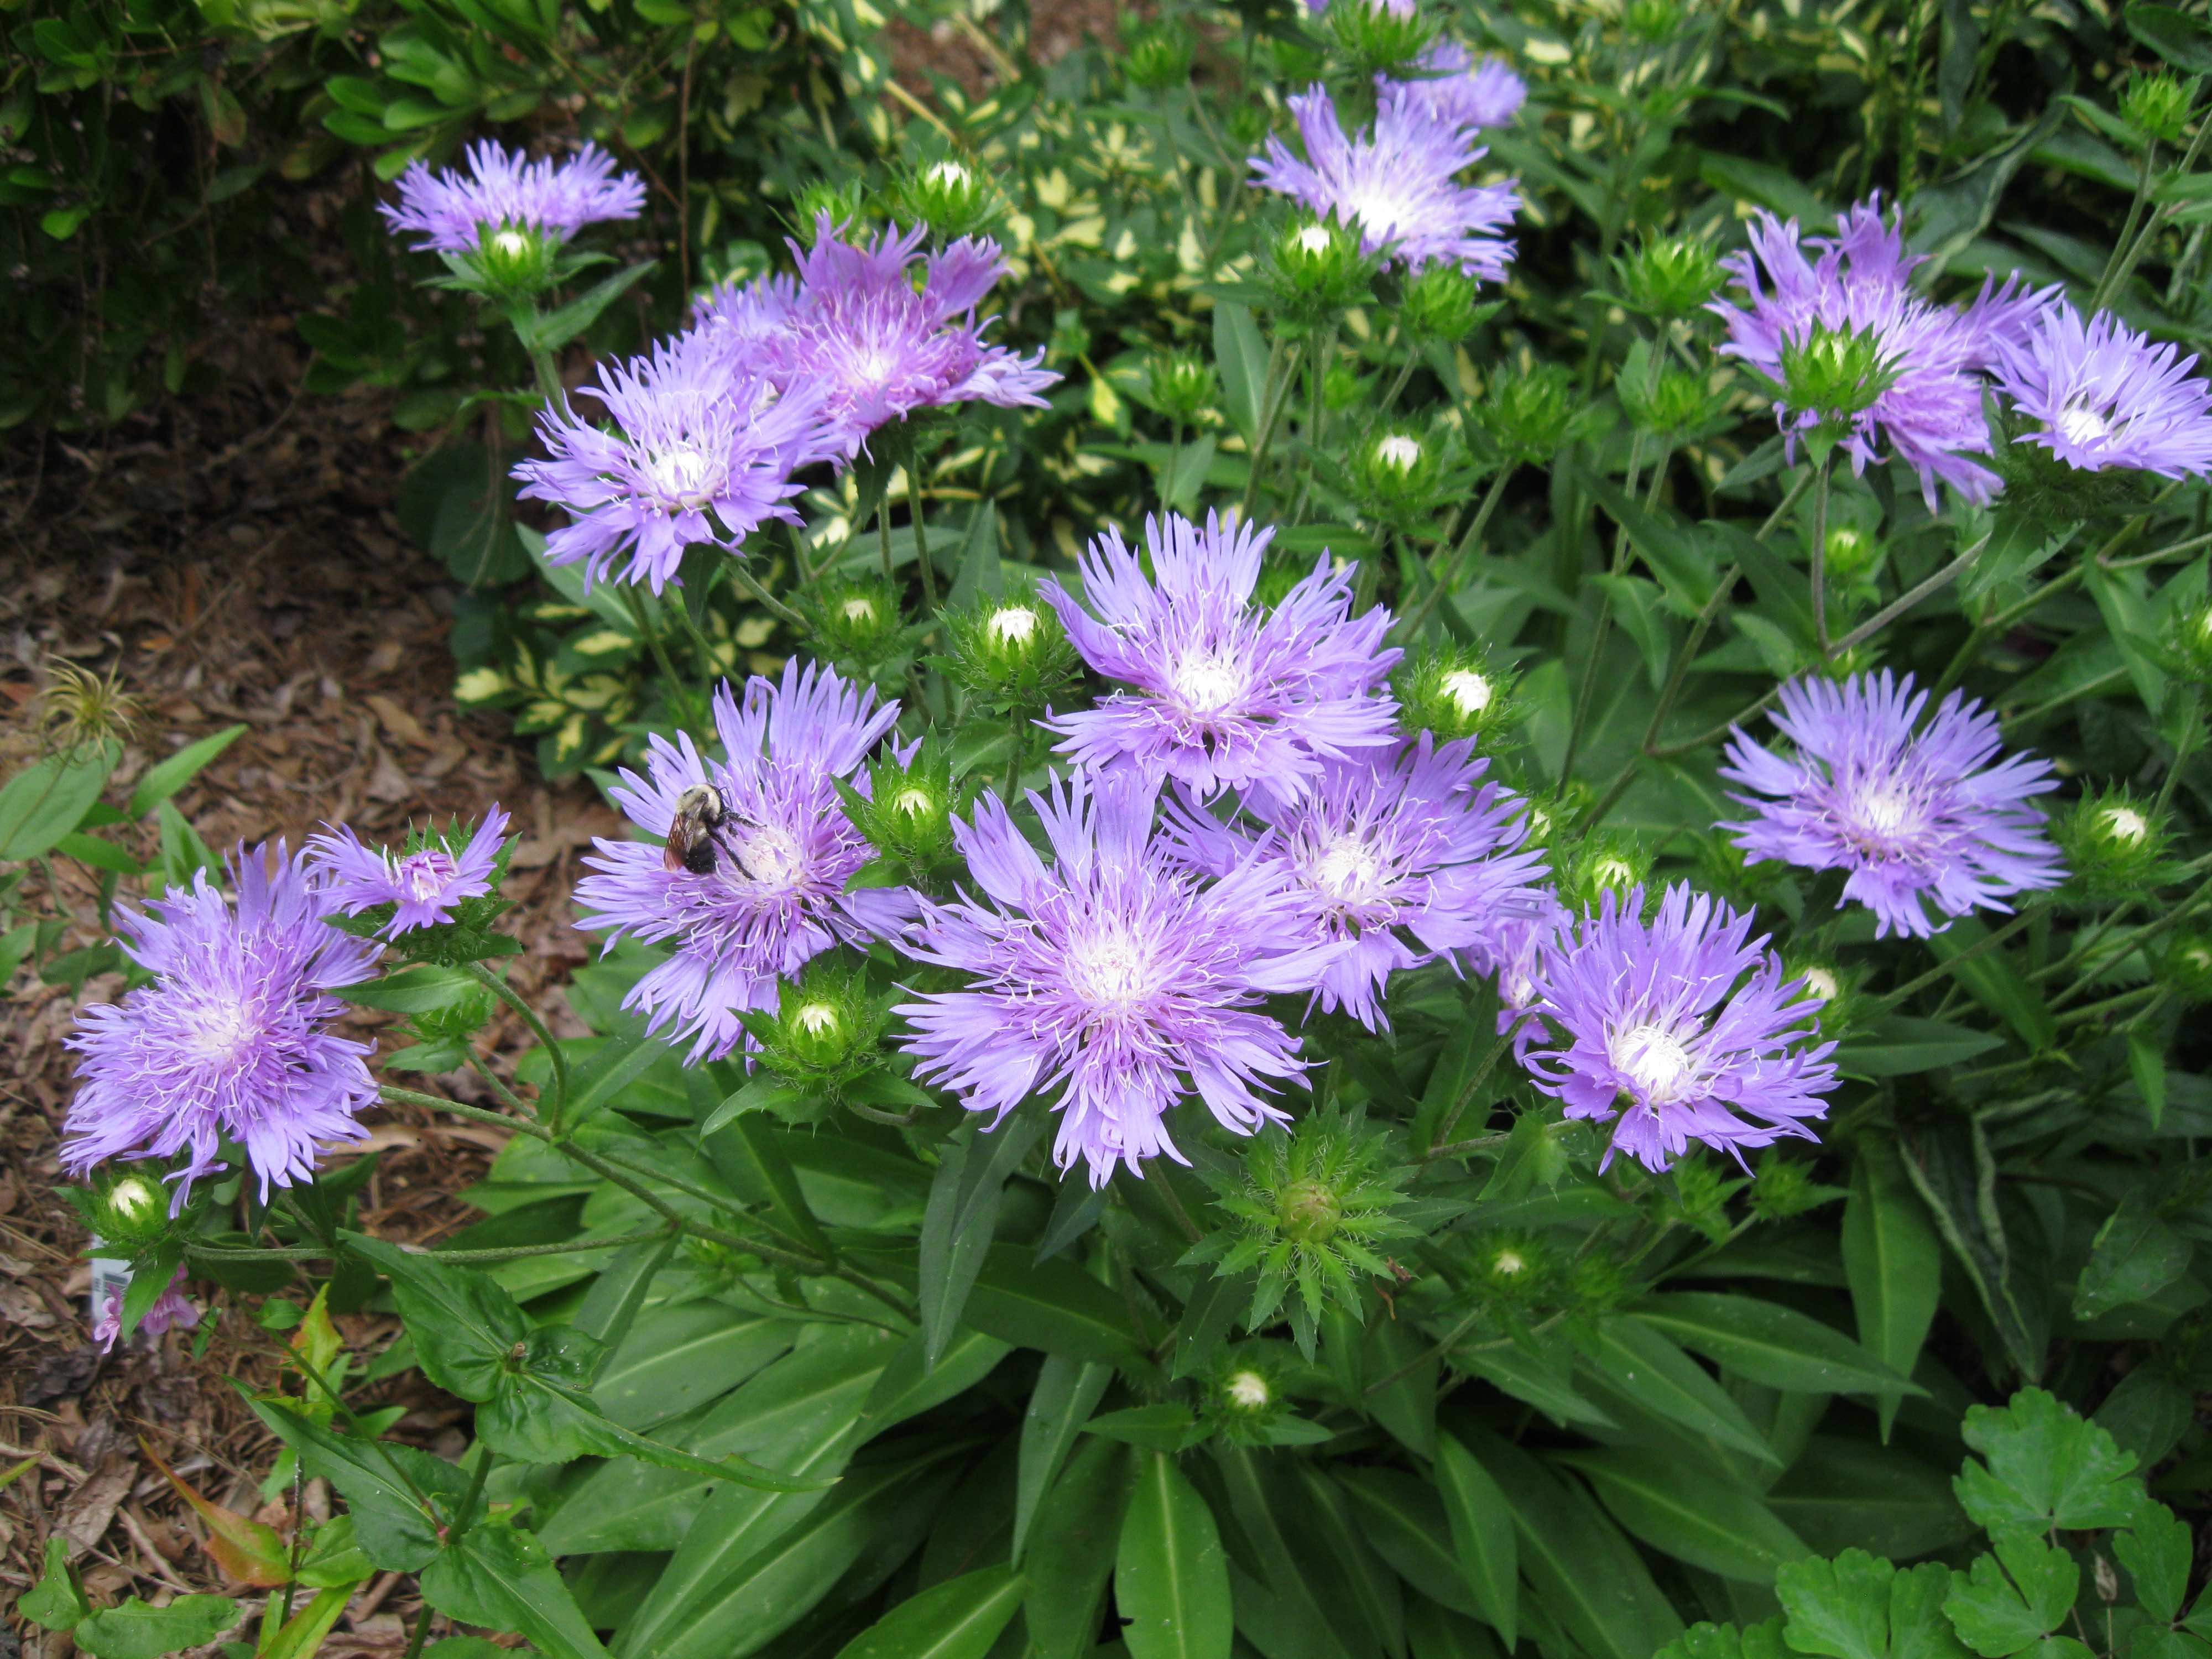 The Scientific Name is Stokesia laevis. You will likely hear them called Stokes Aster, Stokesia, Blue Stokesia, Stokes's Aster, Cornflower Aster. This picture shows the  of Stokesia laevis